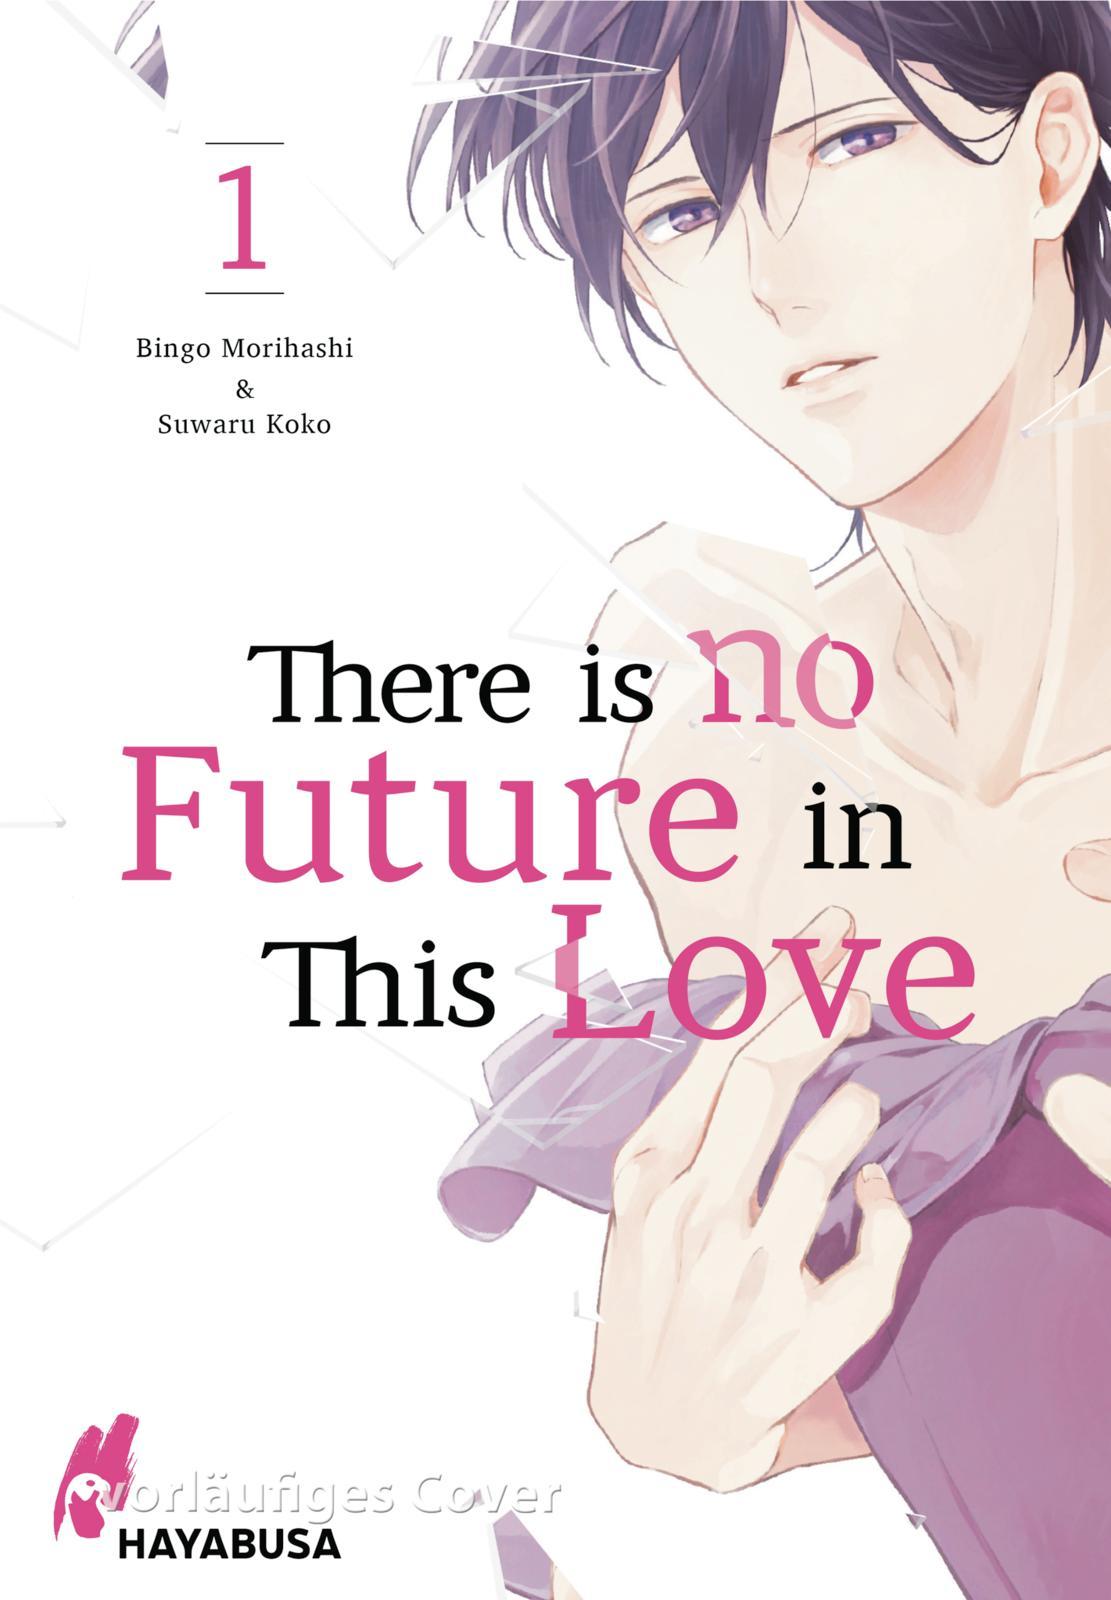 There is no Future in This Love